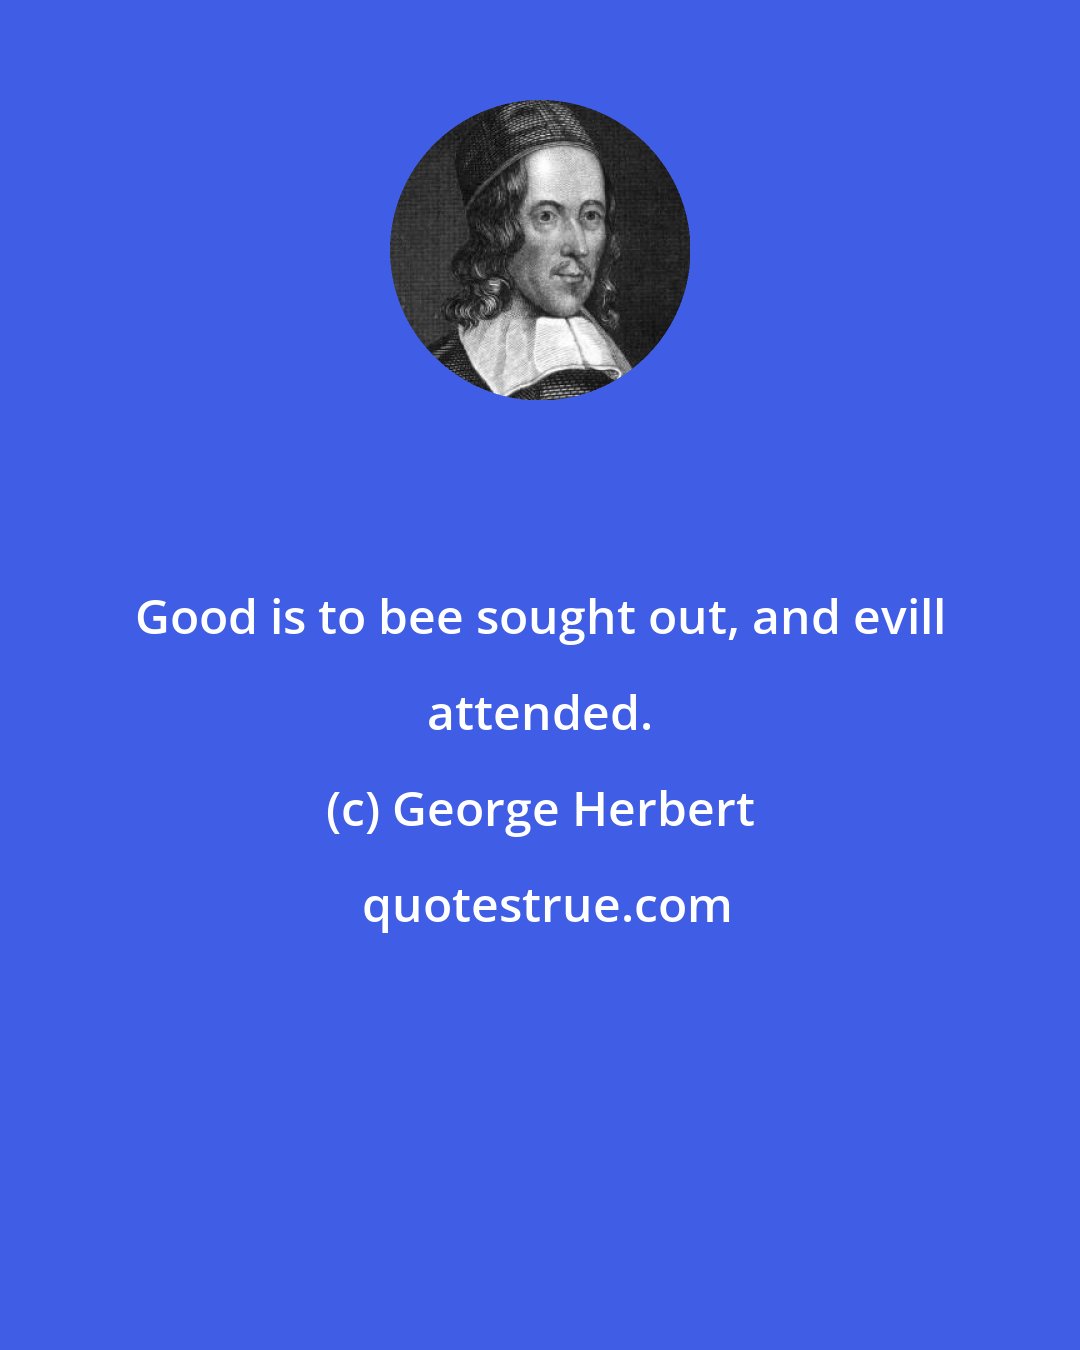 George Herbert: Good is to bee sought out, and evill attended.